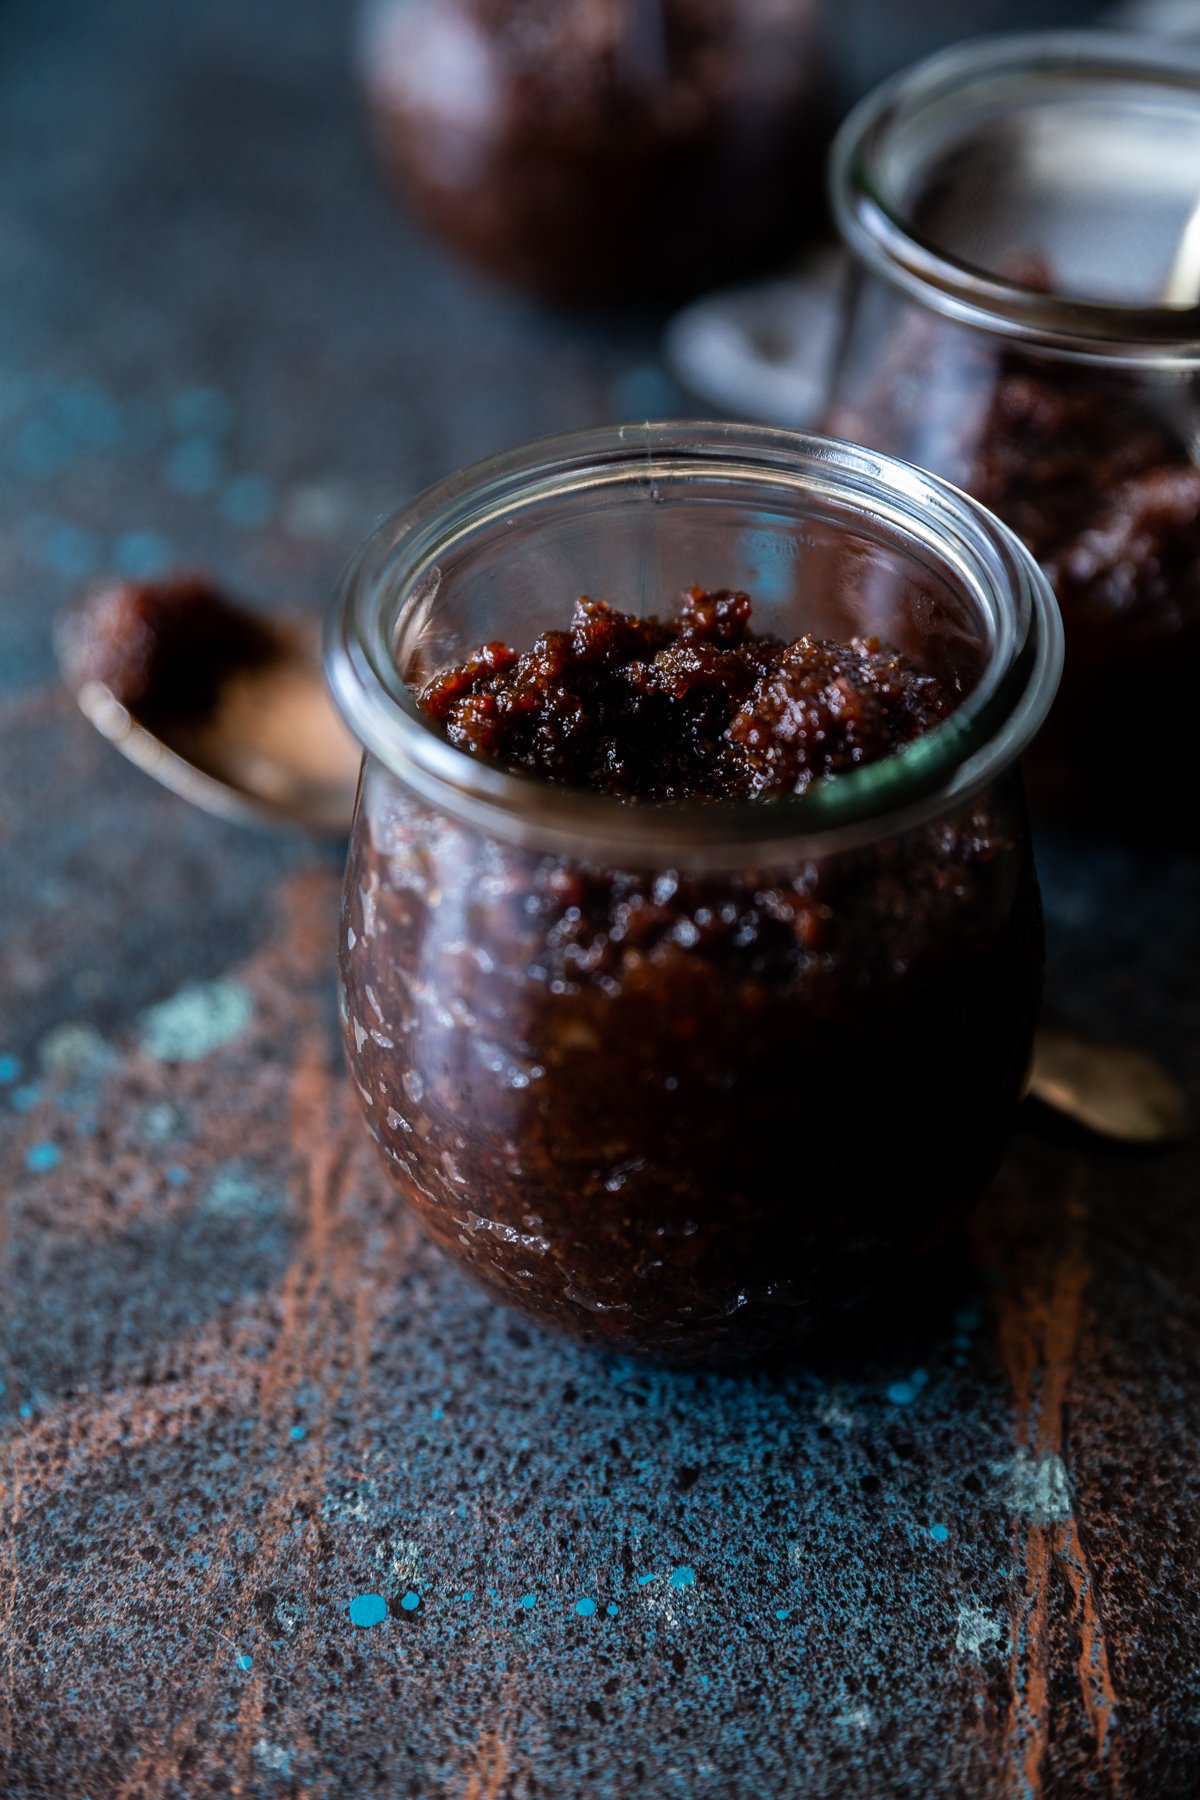 Bacon jam in small tulip jars, spoon with bacon jam on it